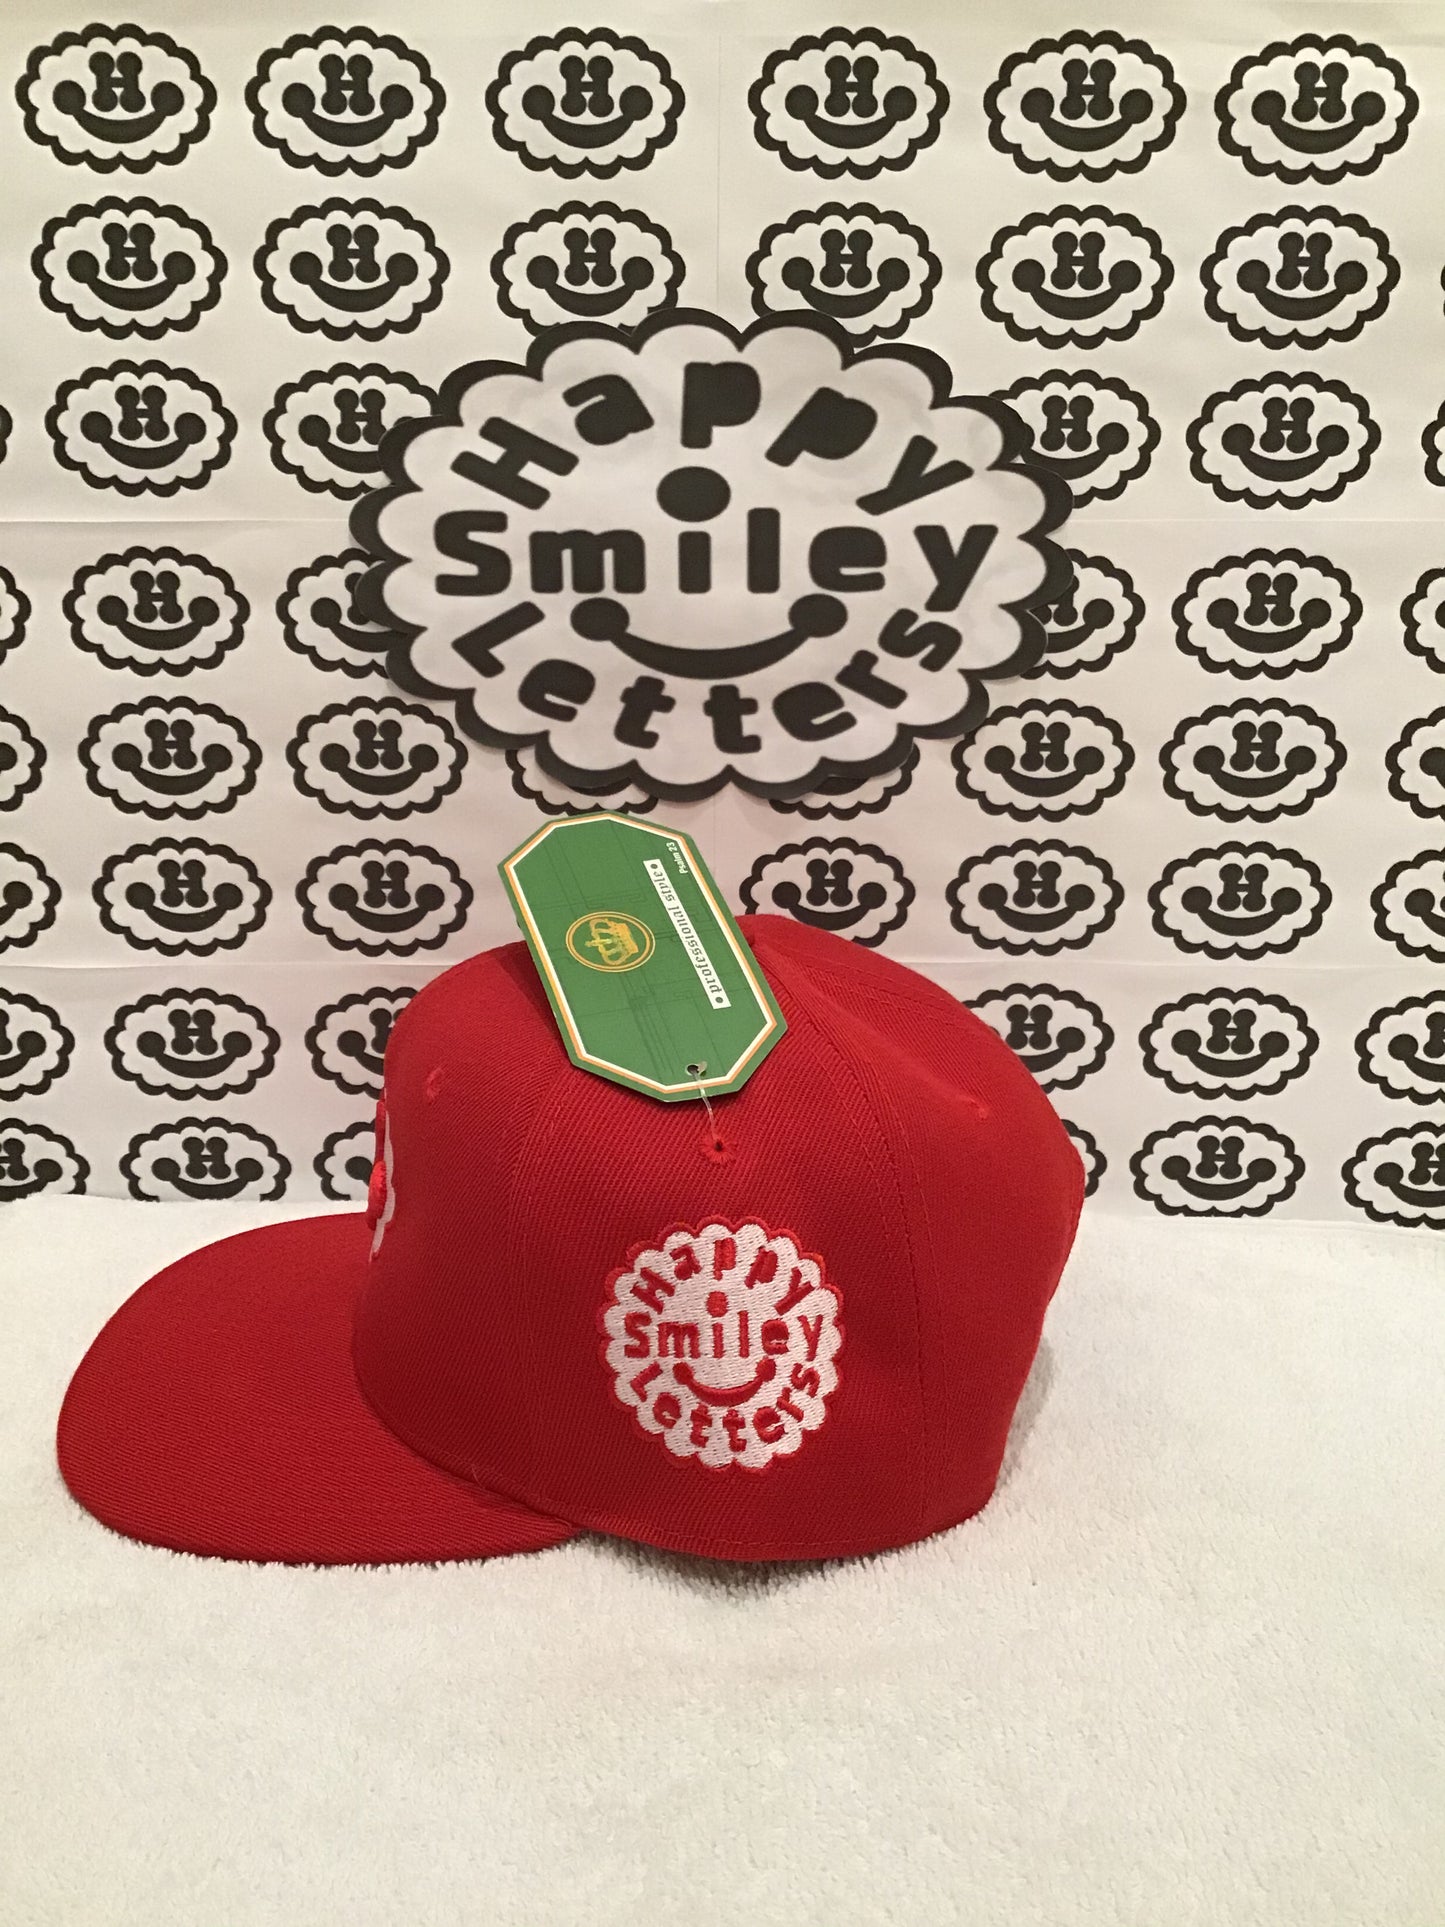 Polyester Snapback cap - Red